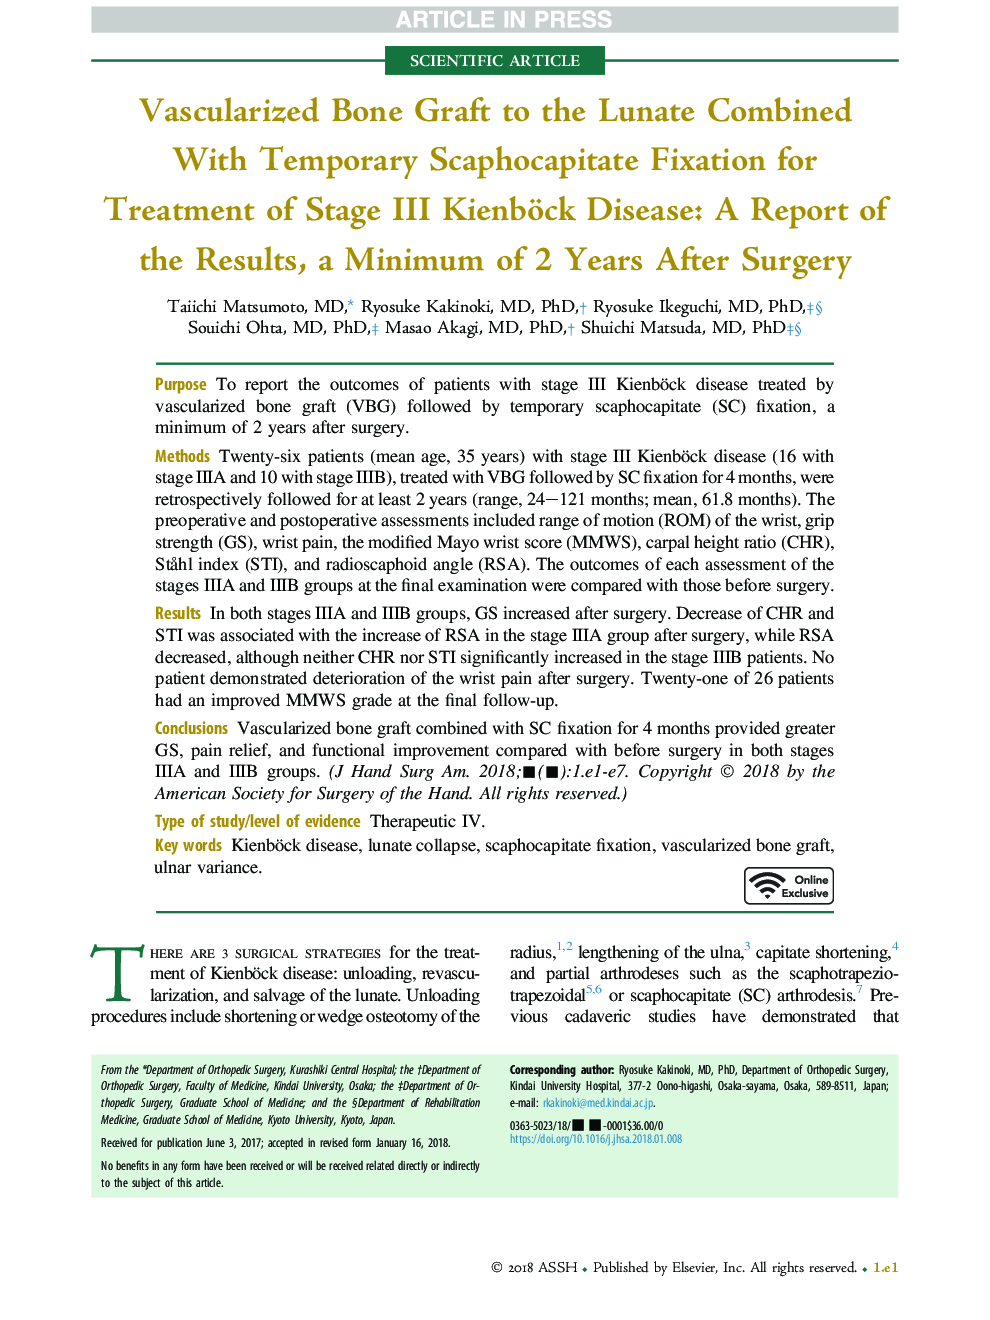 Vascularized Bone Graft to the Lunate Combined WithÂ Temporary Scaphocapitate Fixation for TreatmentÂ of Stage III Kienböck Disease: A Report of the Results, a Minimum of 2 Years After Surgery